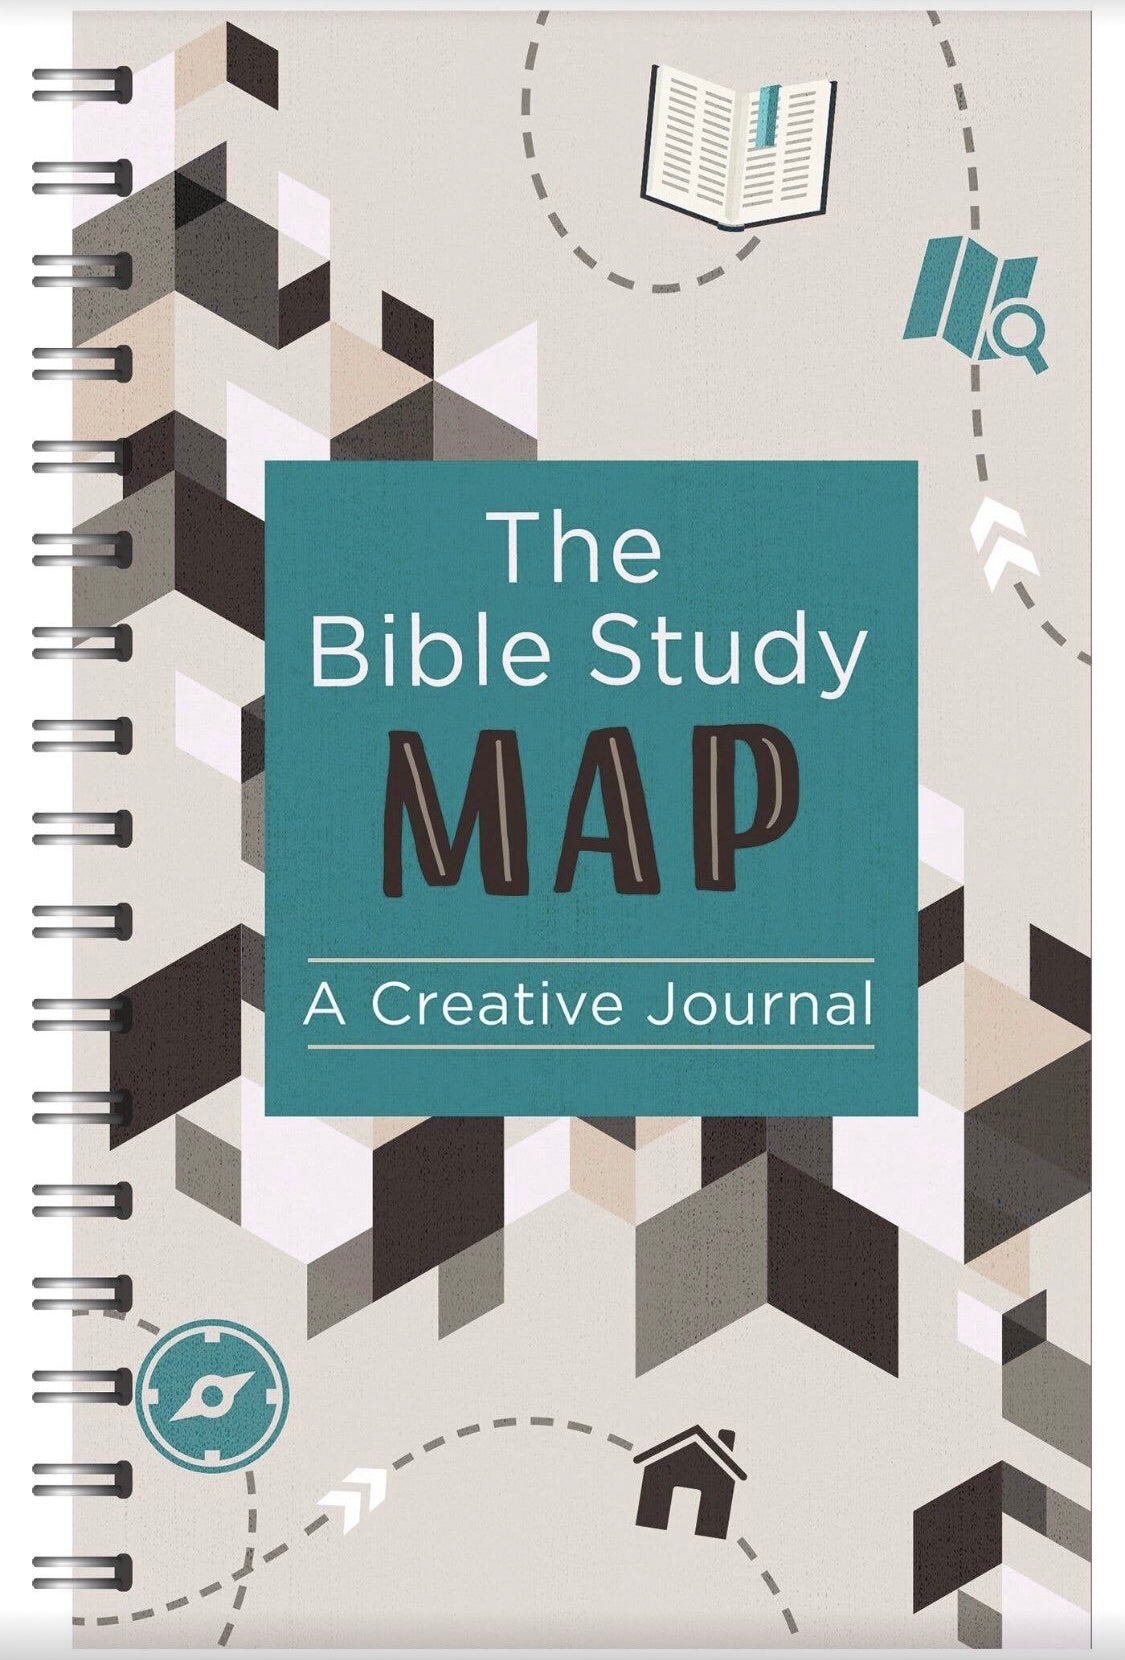 The Bible Study Map - A Creative Journal